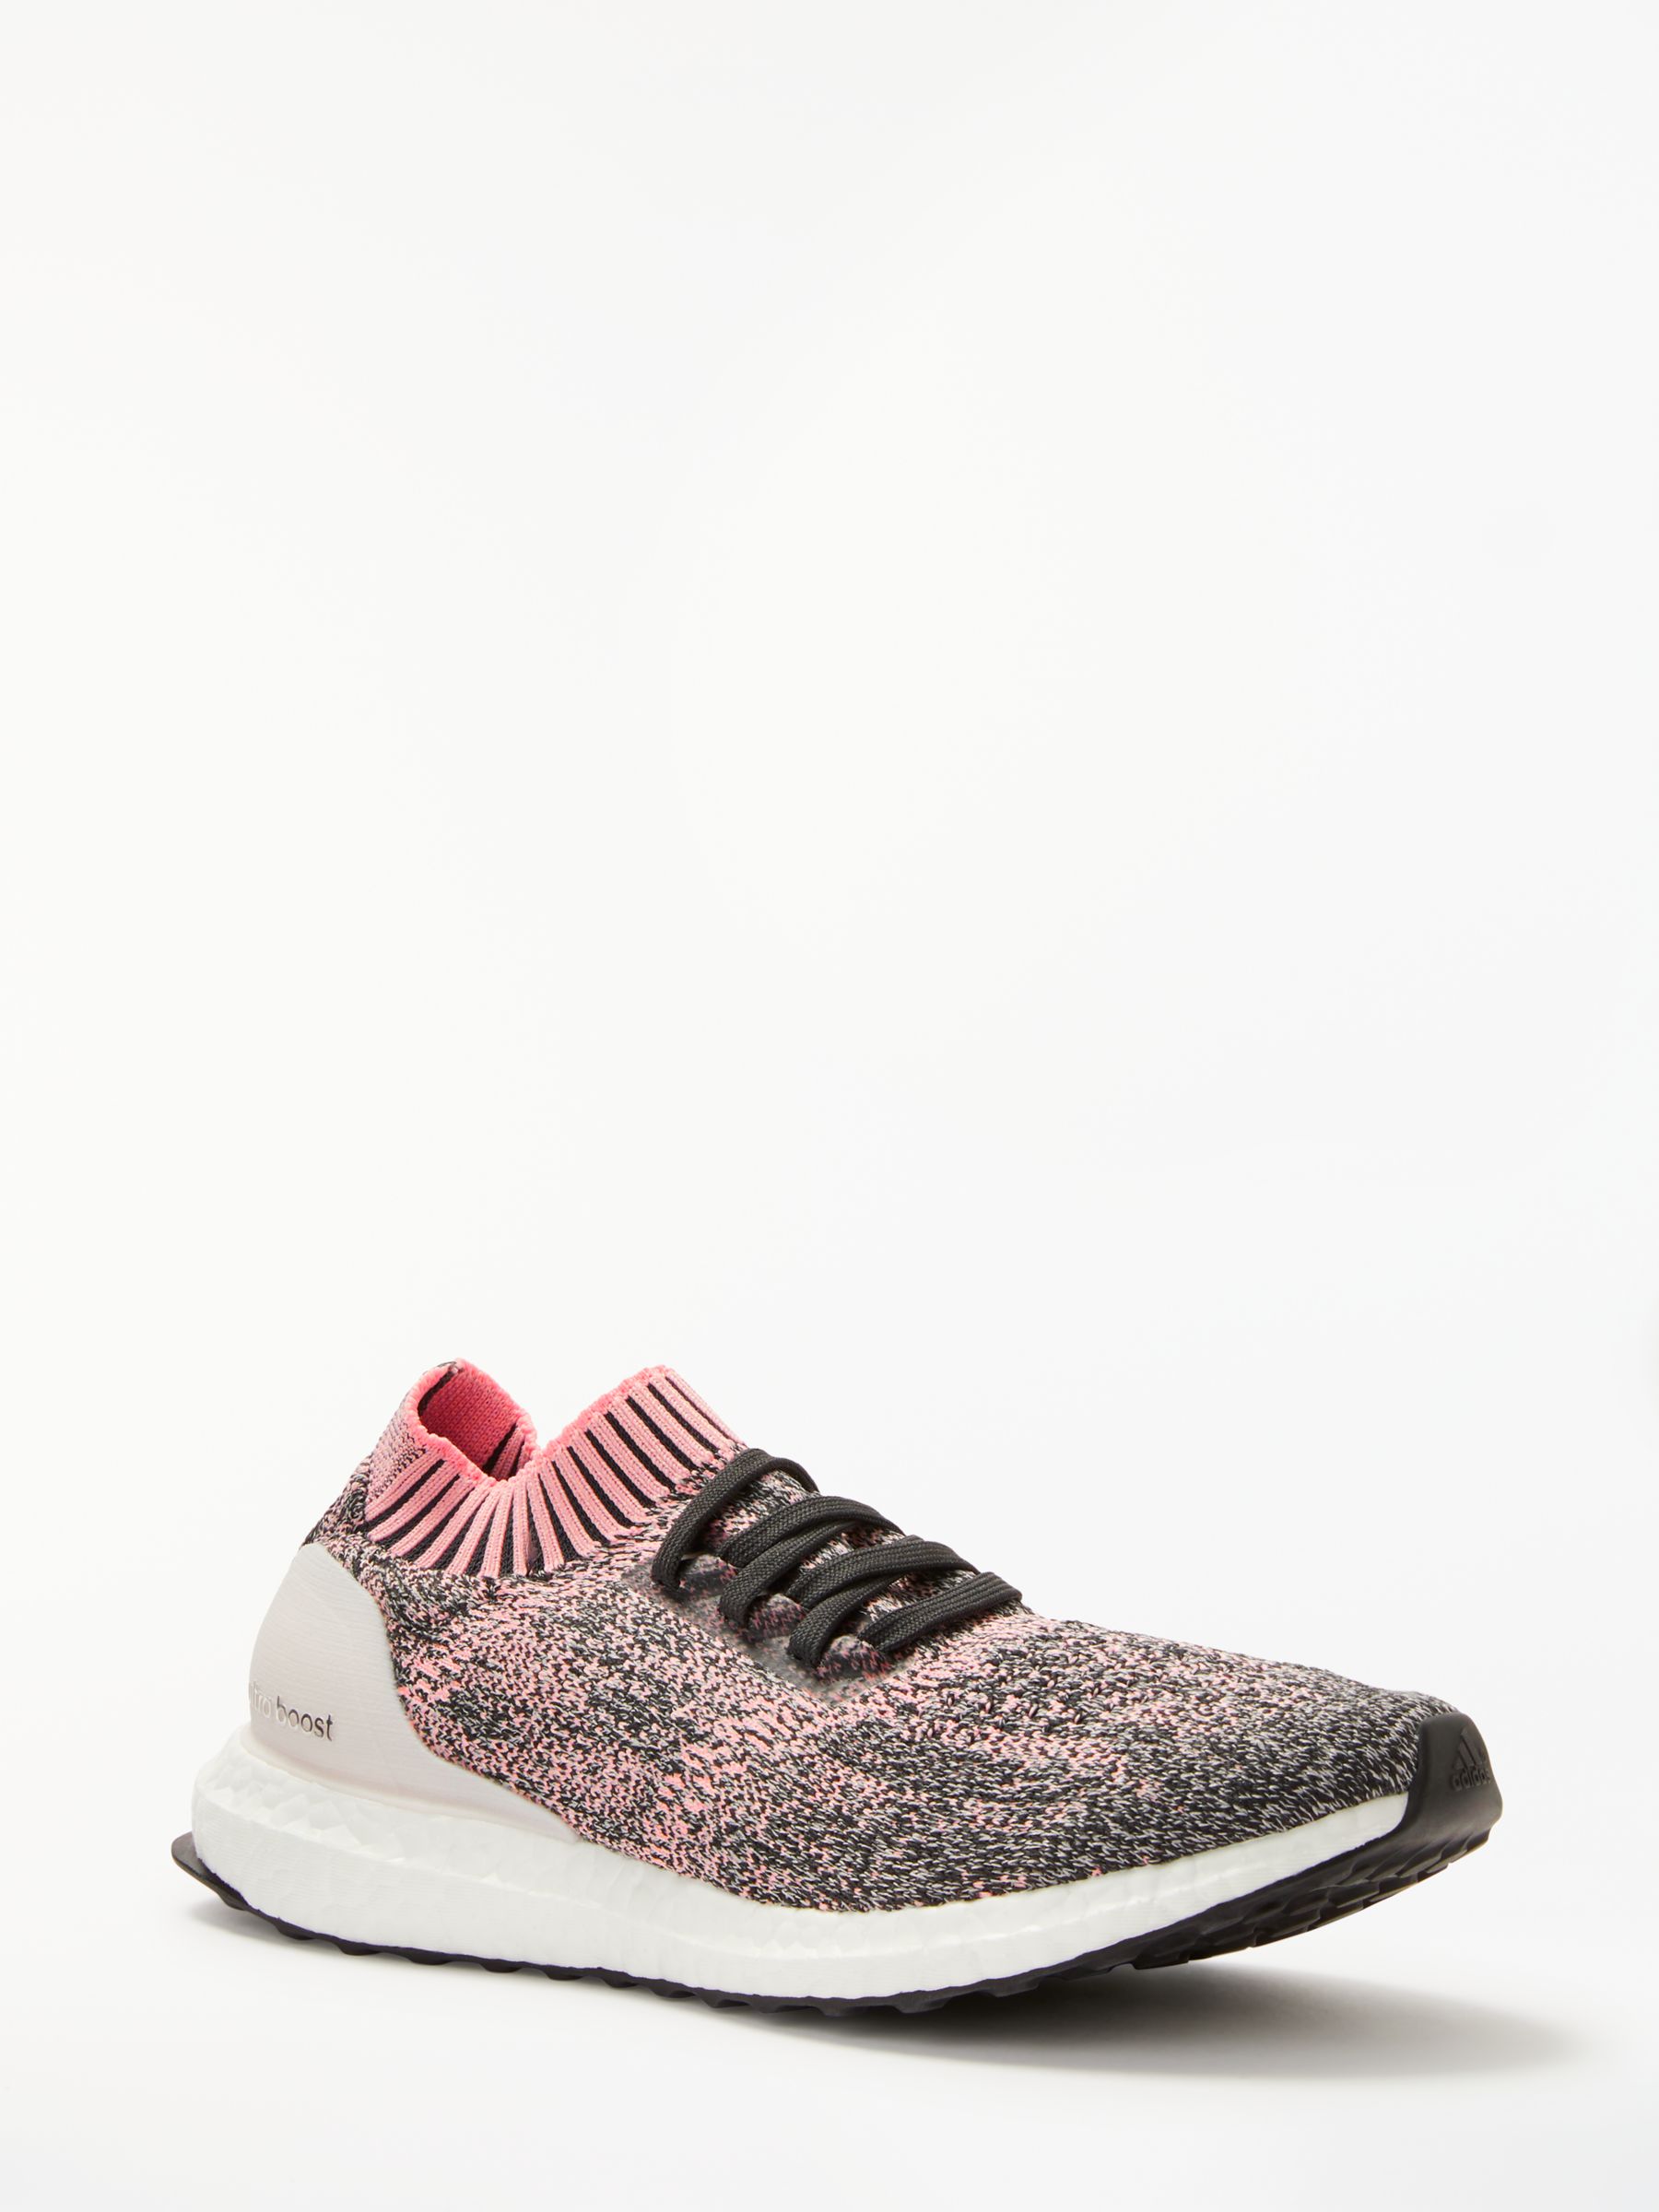 adidas ultra boost uncaged womens pink